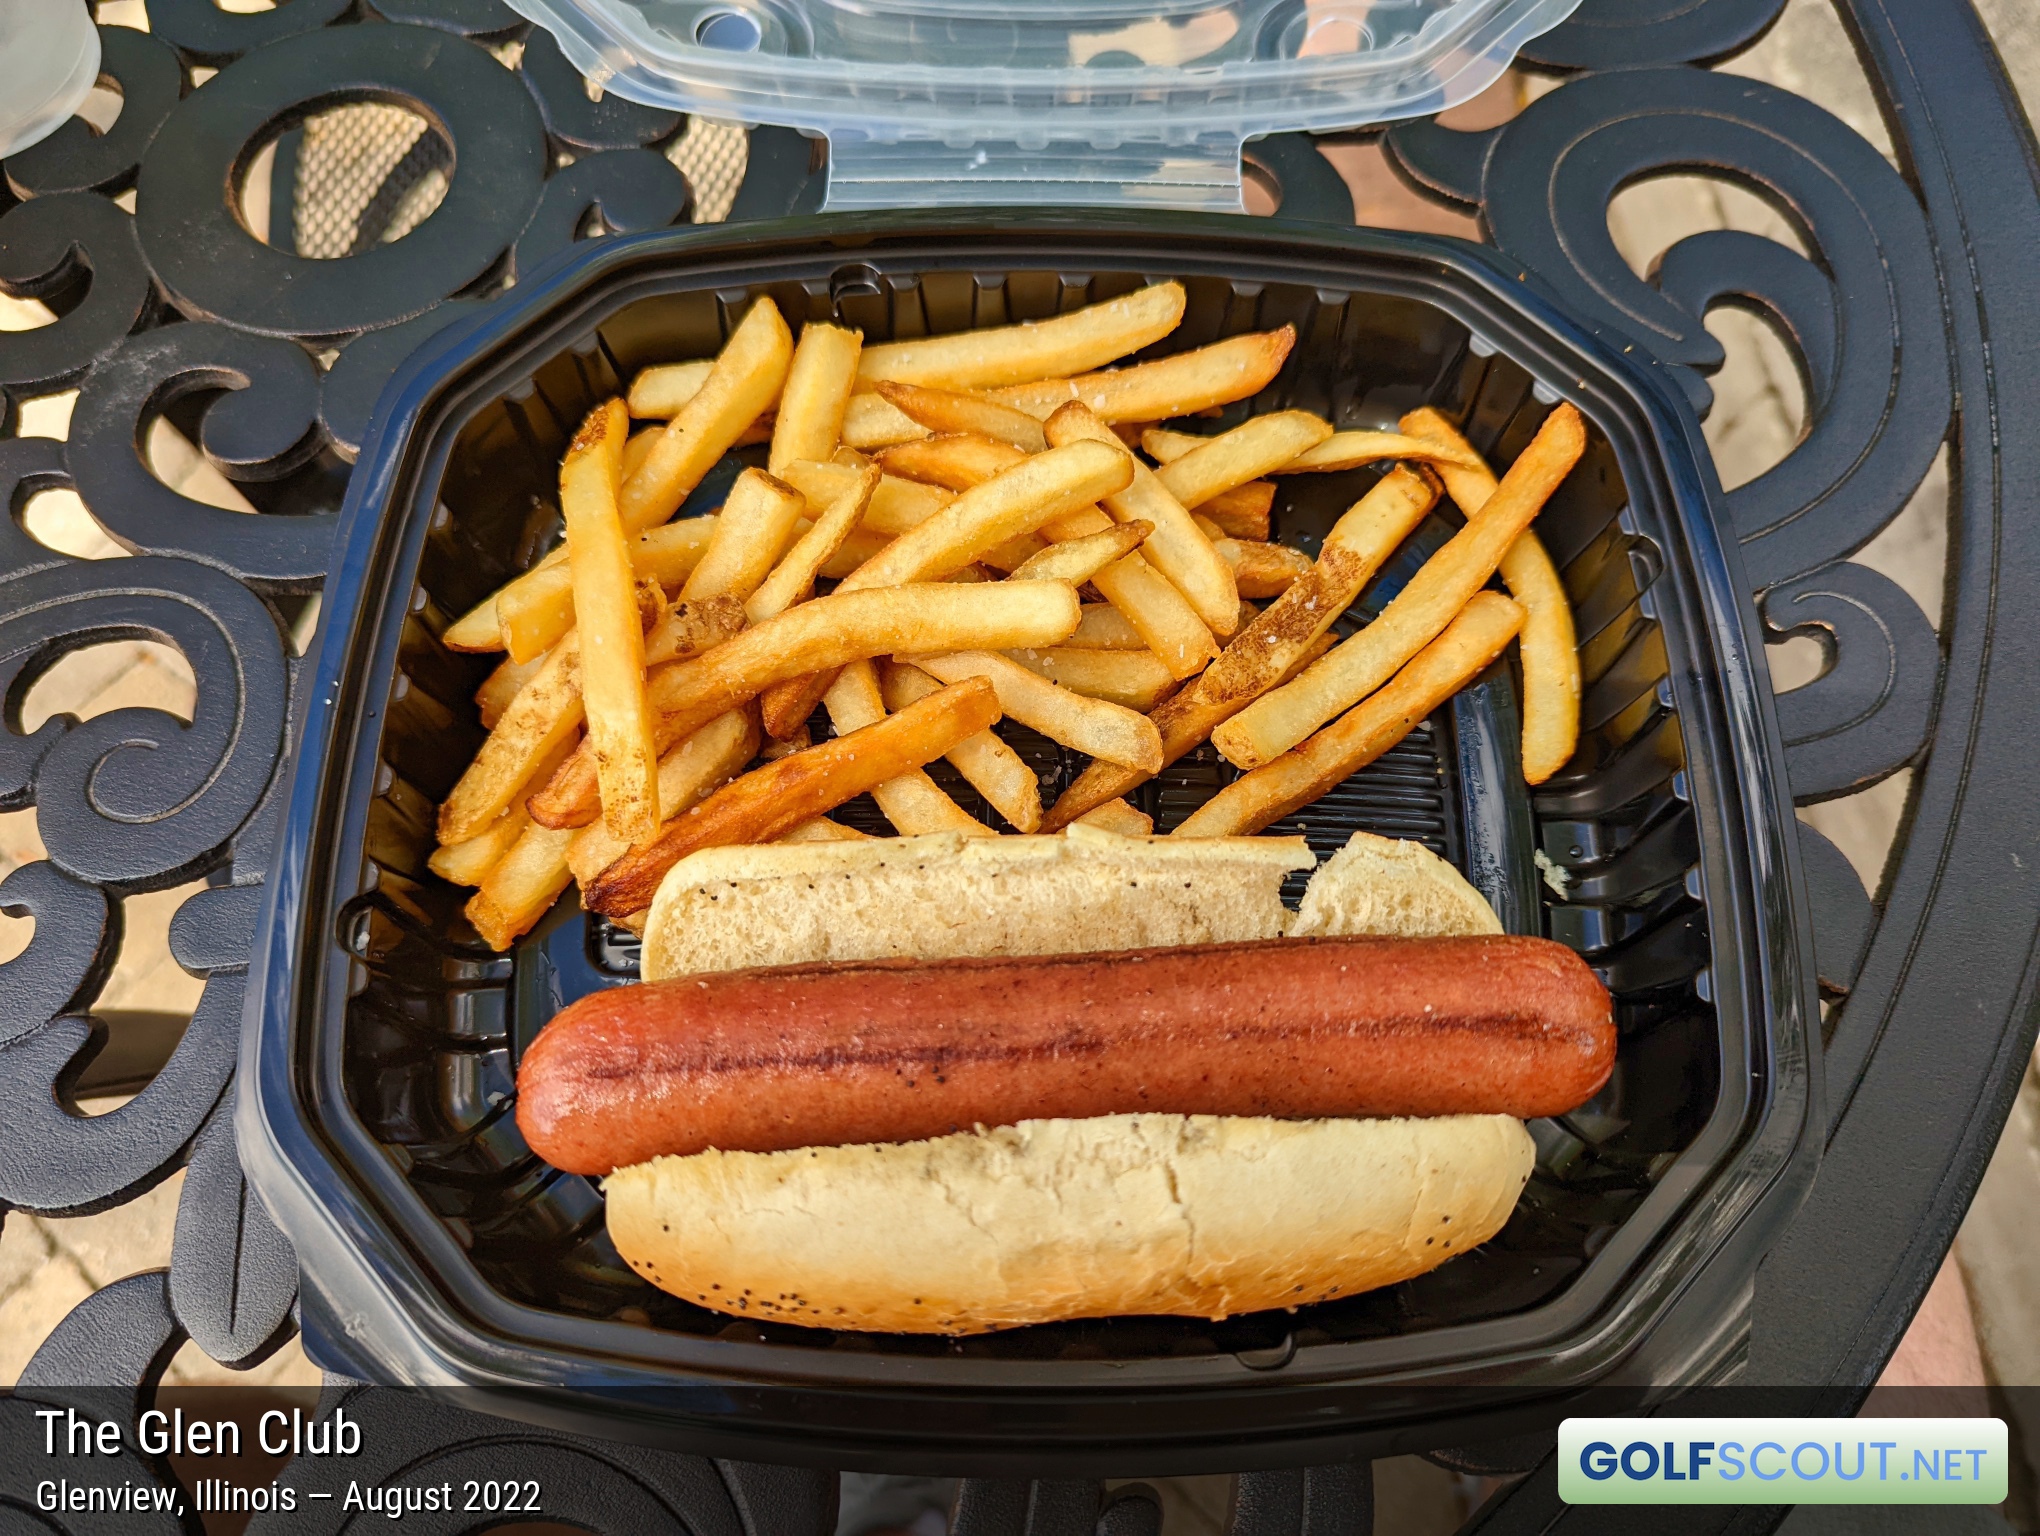 Photo of the food and dining at The Glen Club in Glenview, Illinois. Photo of the hot dog at The Glen Club in Glenview, Illinois.